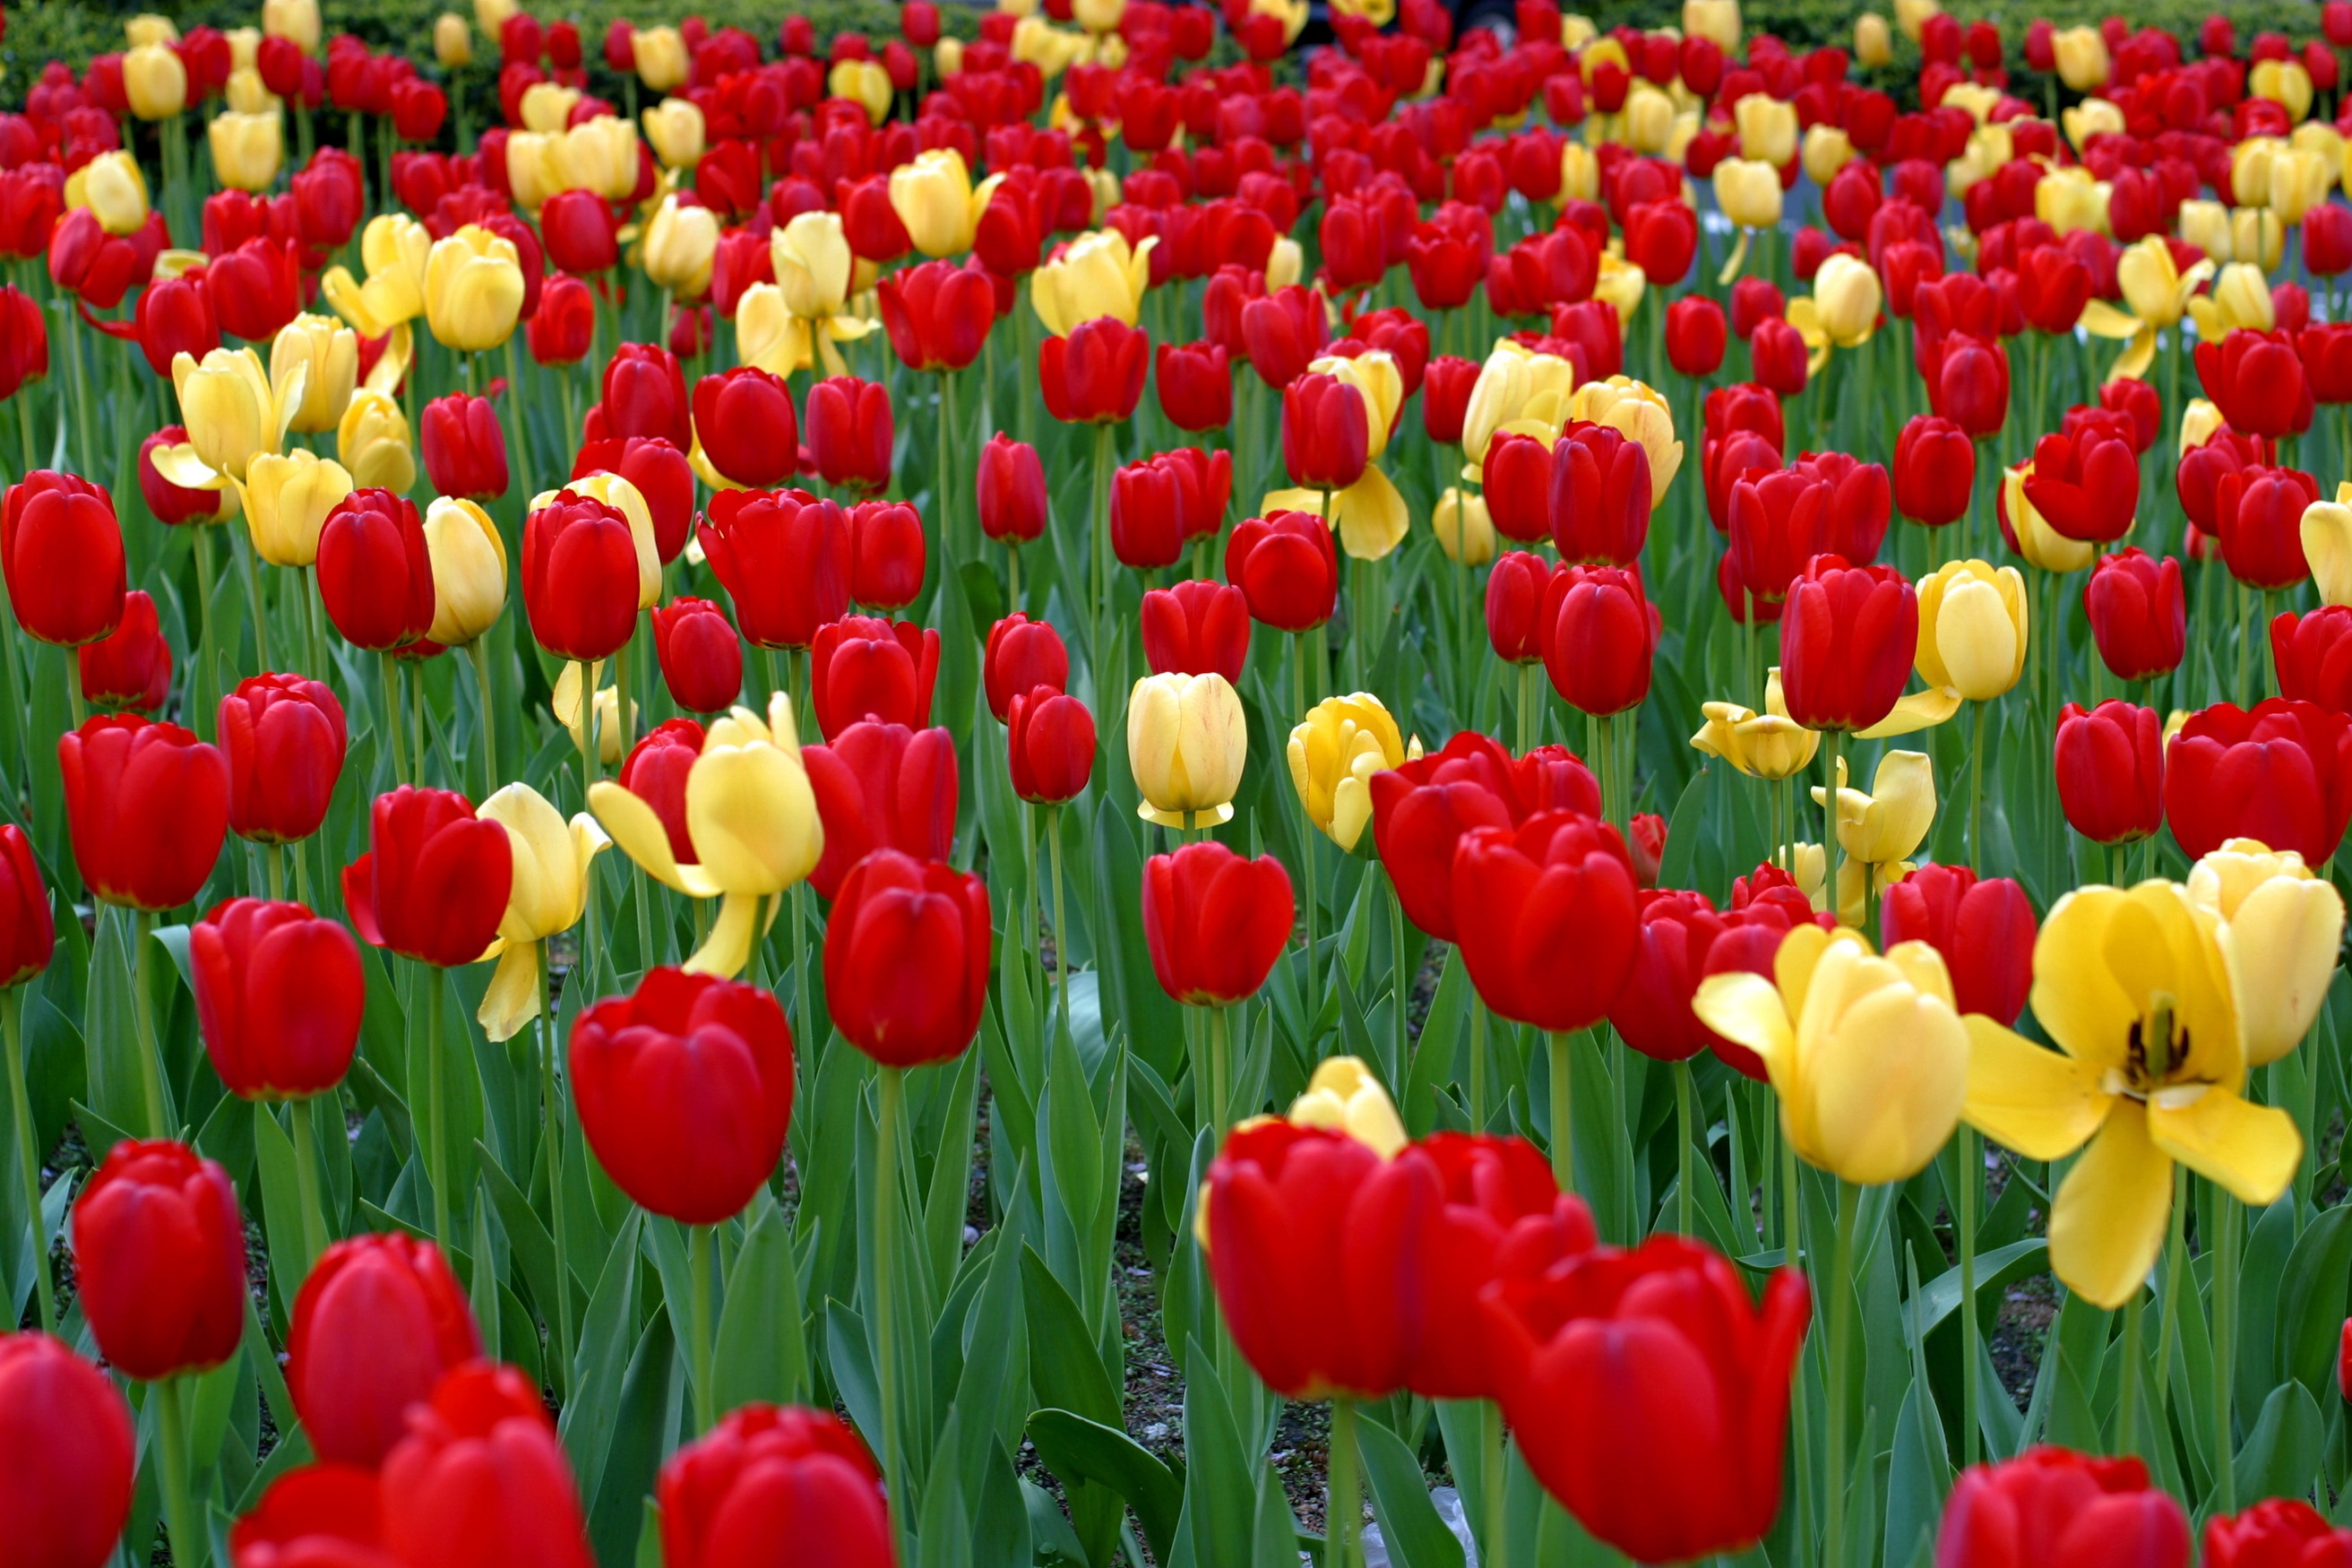 New Lock Screen Wallpapers tulips, flowers, yellow, red, greens, flower bed, flowerbed, spring